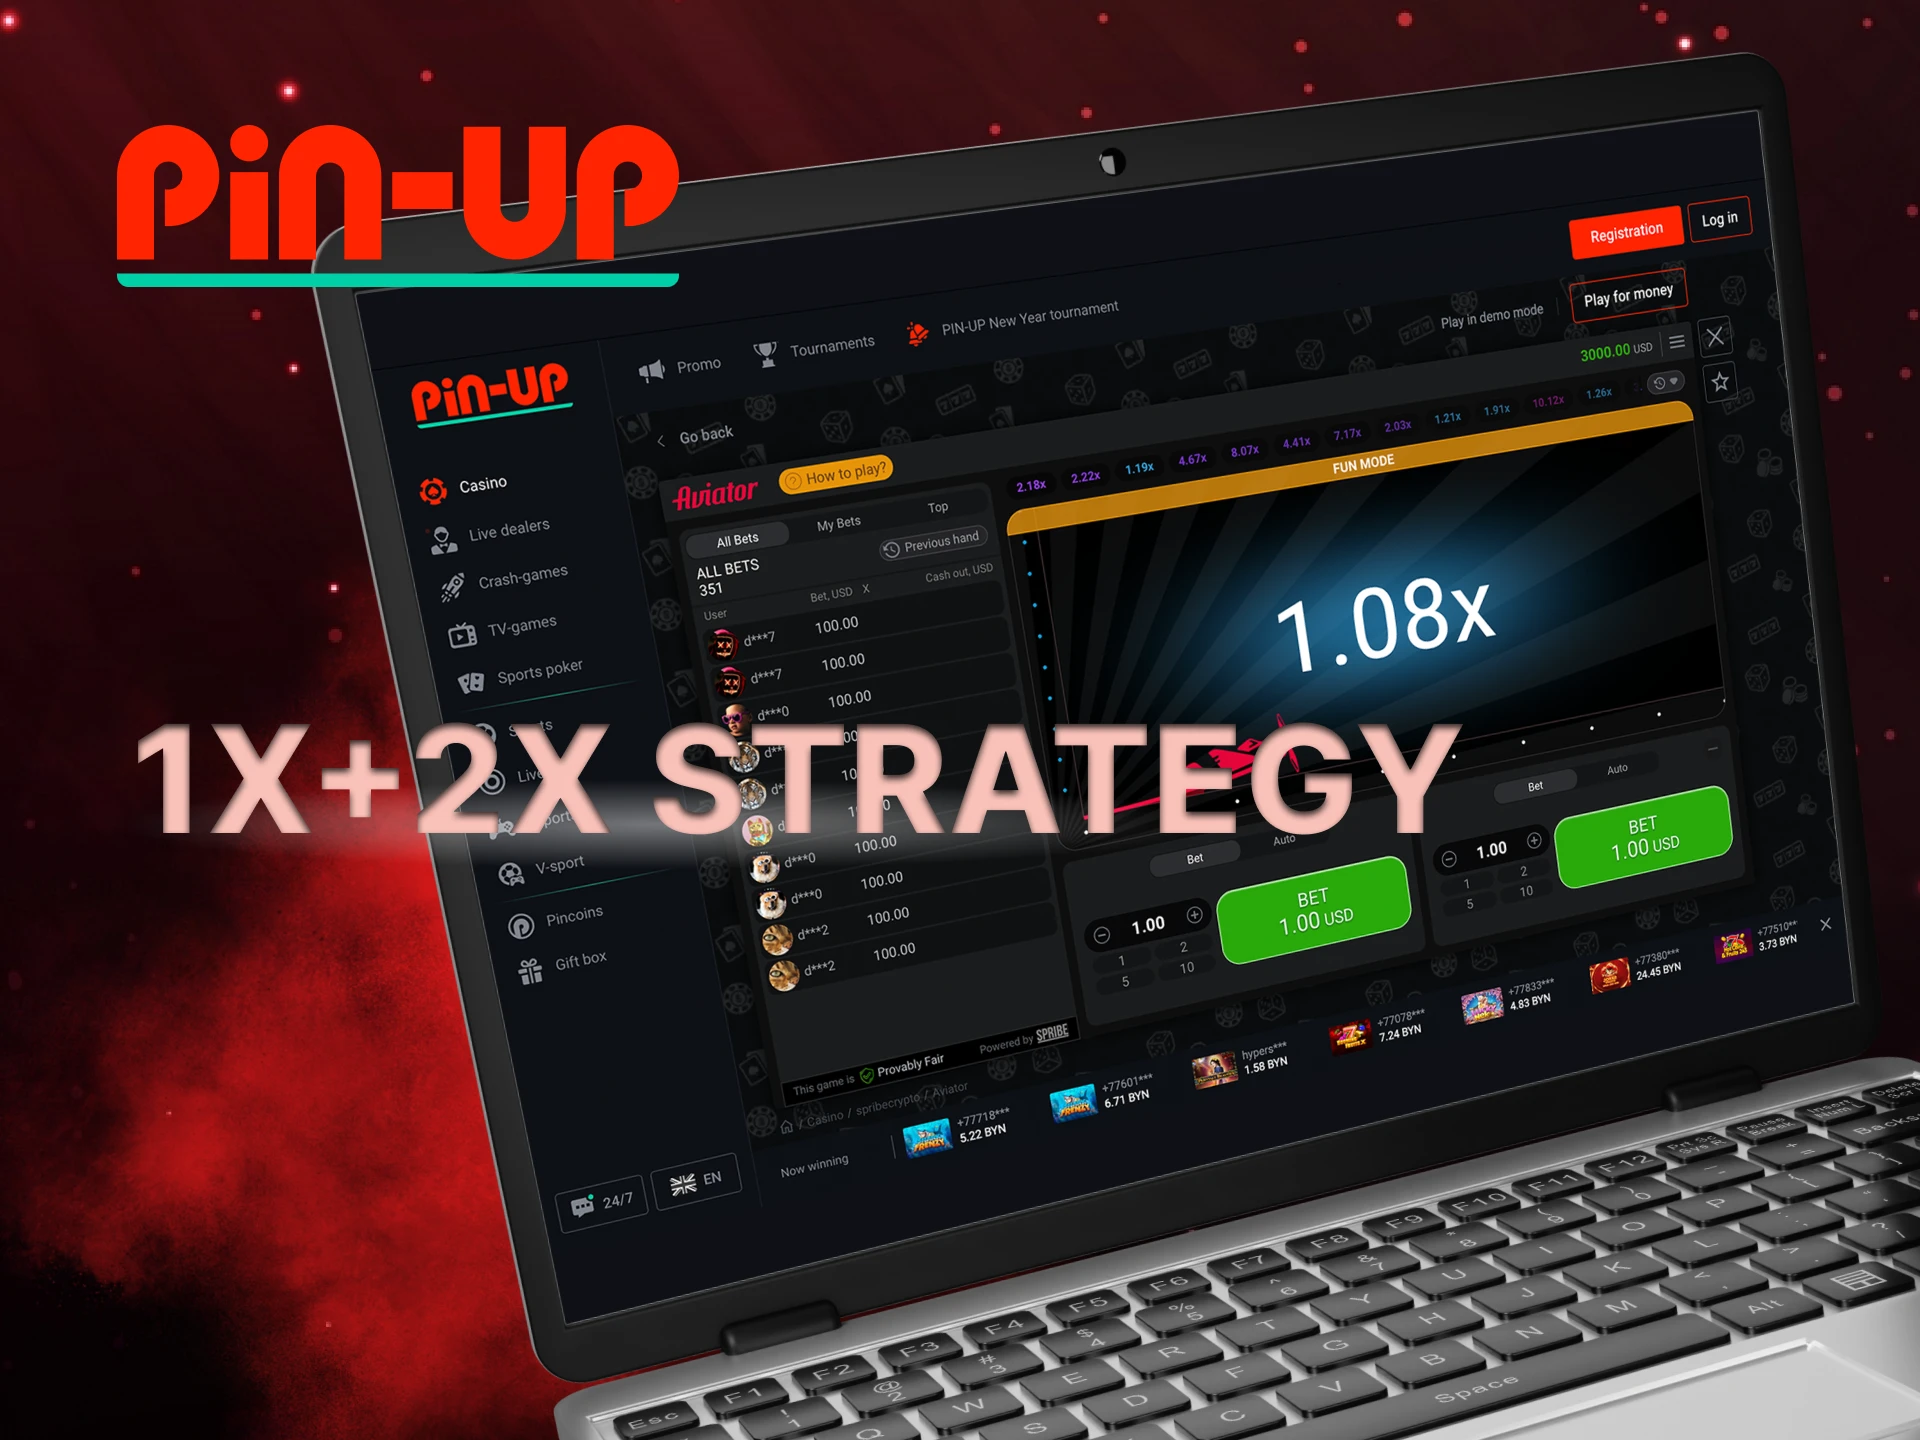 What is 1x+2x Strategy for the Aviator game at Pin Up casino.